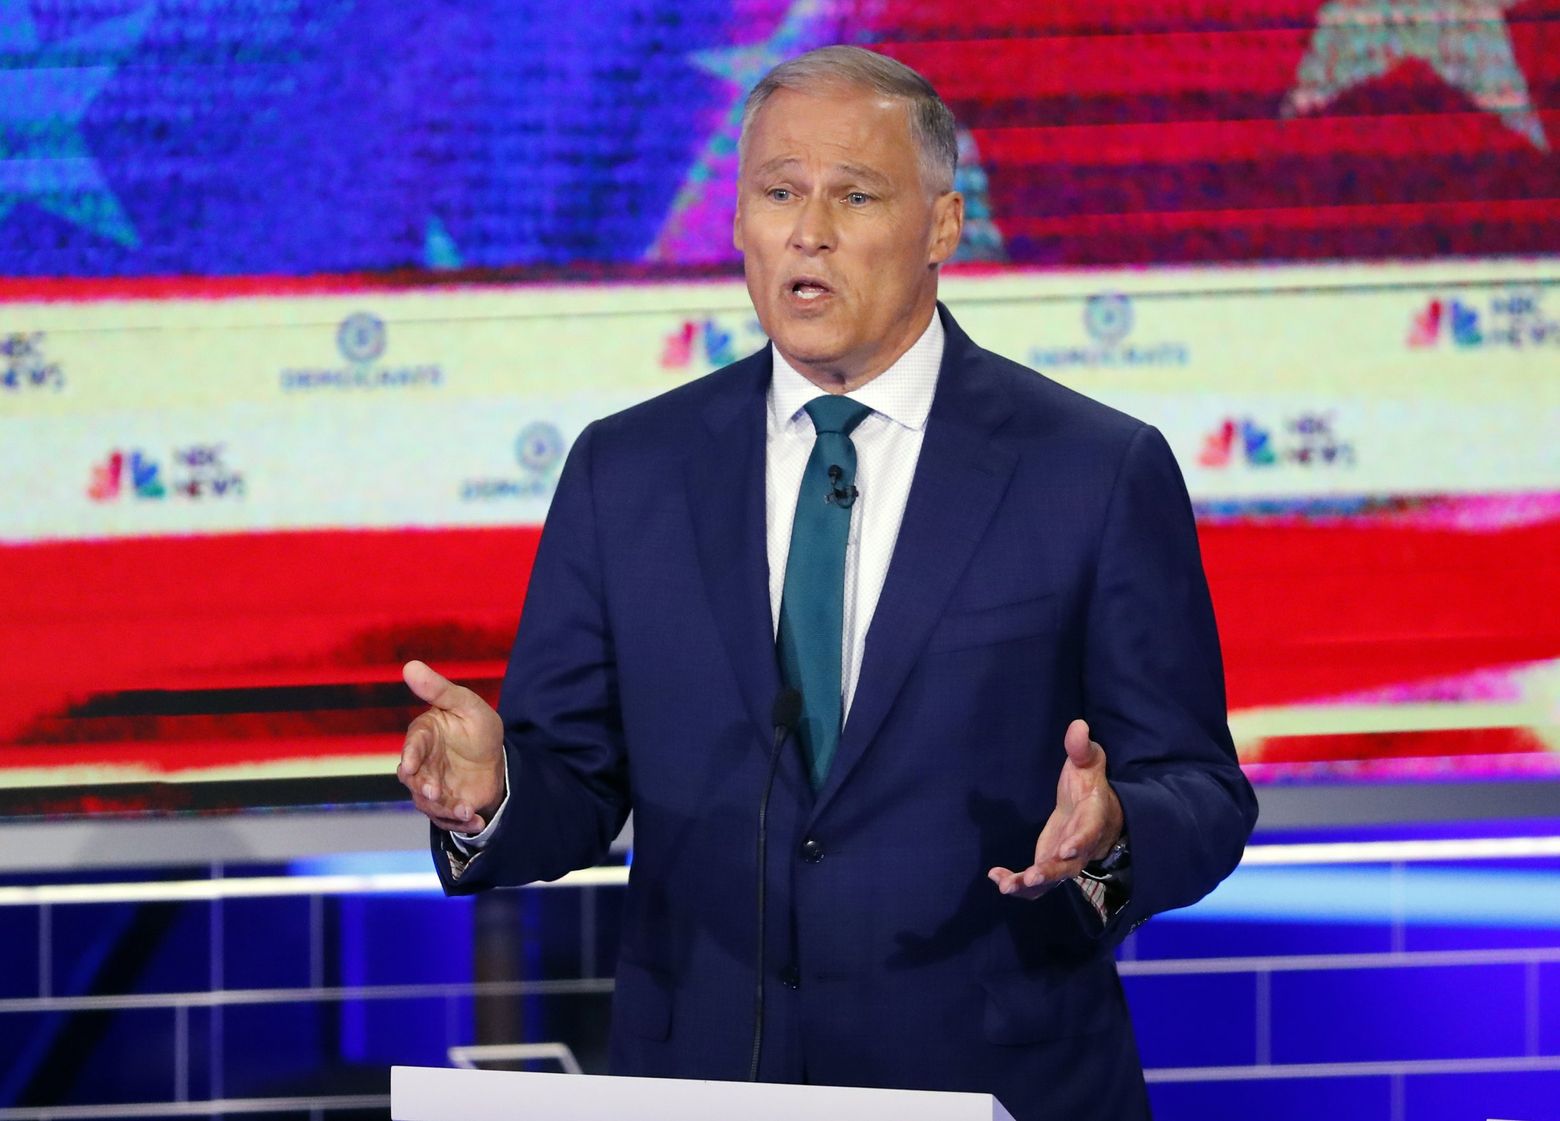 Washington Gov. Jay Inslee struggles to speaking time in first Democratic presidential primary debate | The Seattle Times